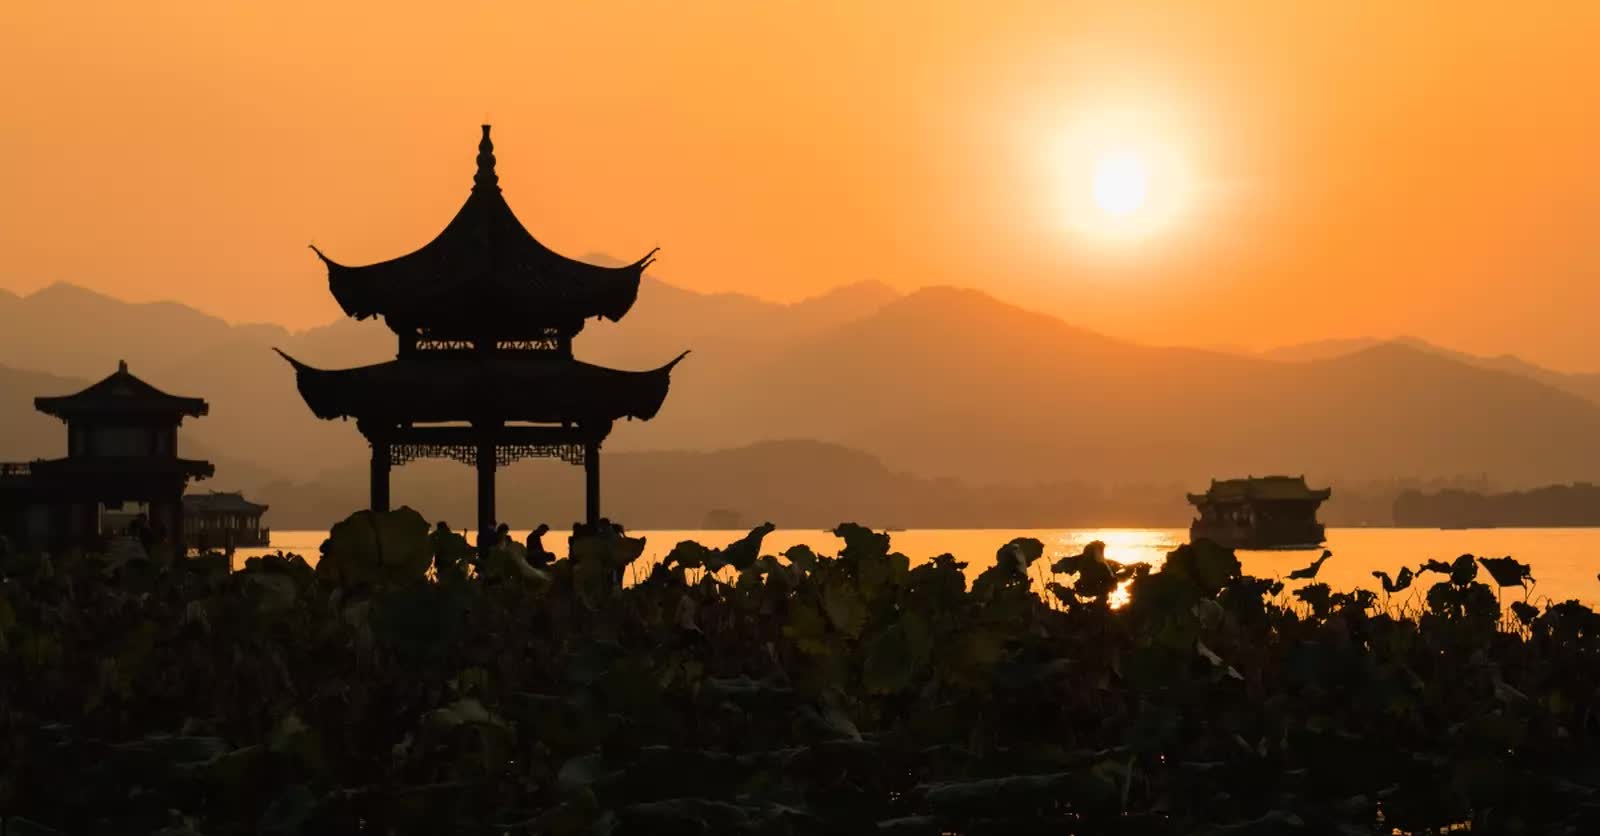 Silhouette of a Chinese building at sunset